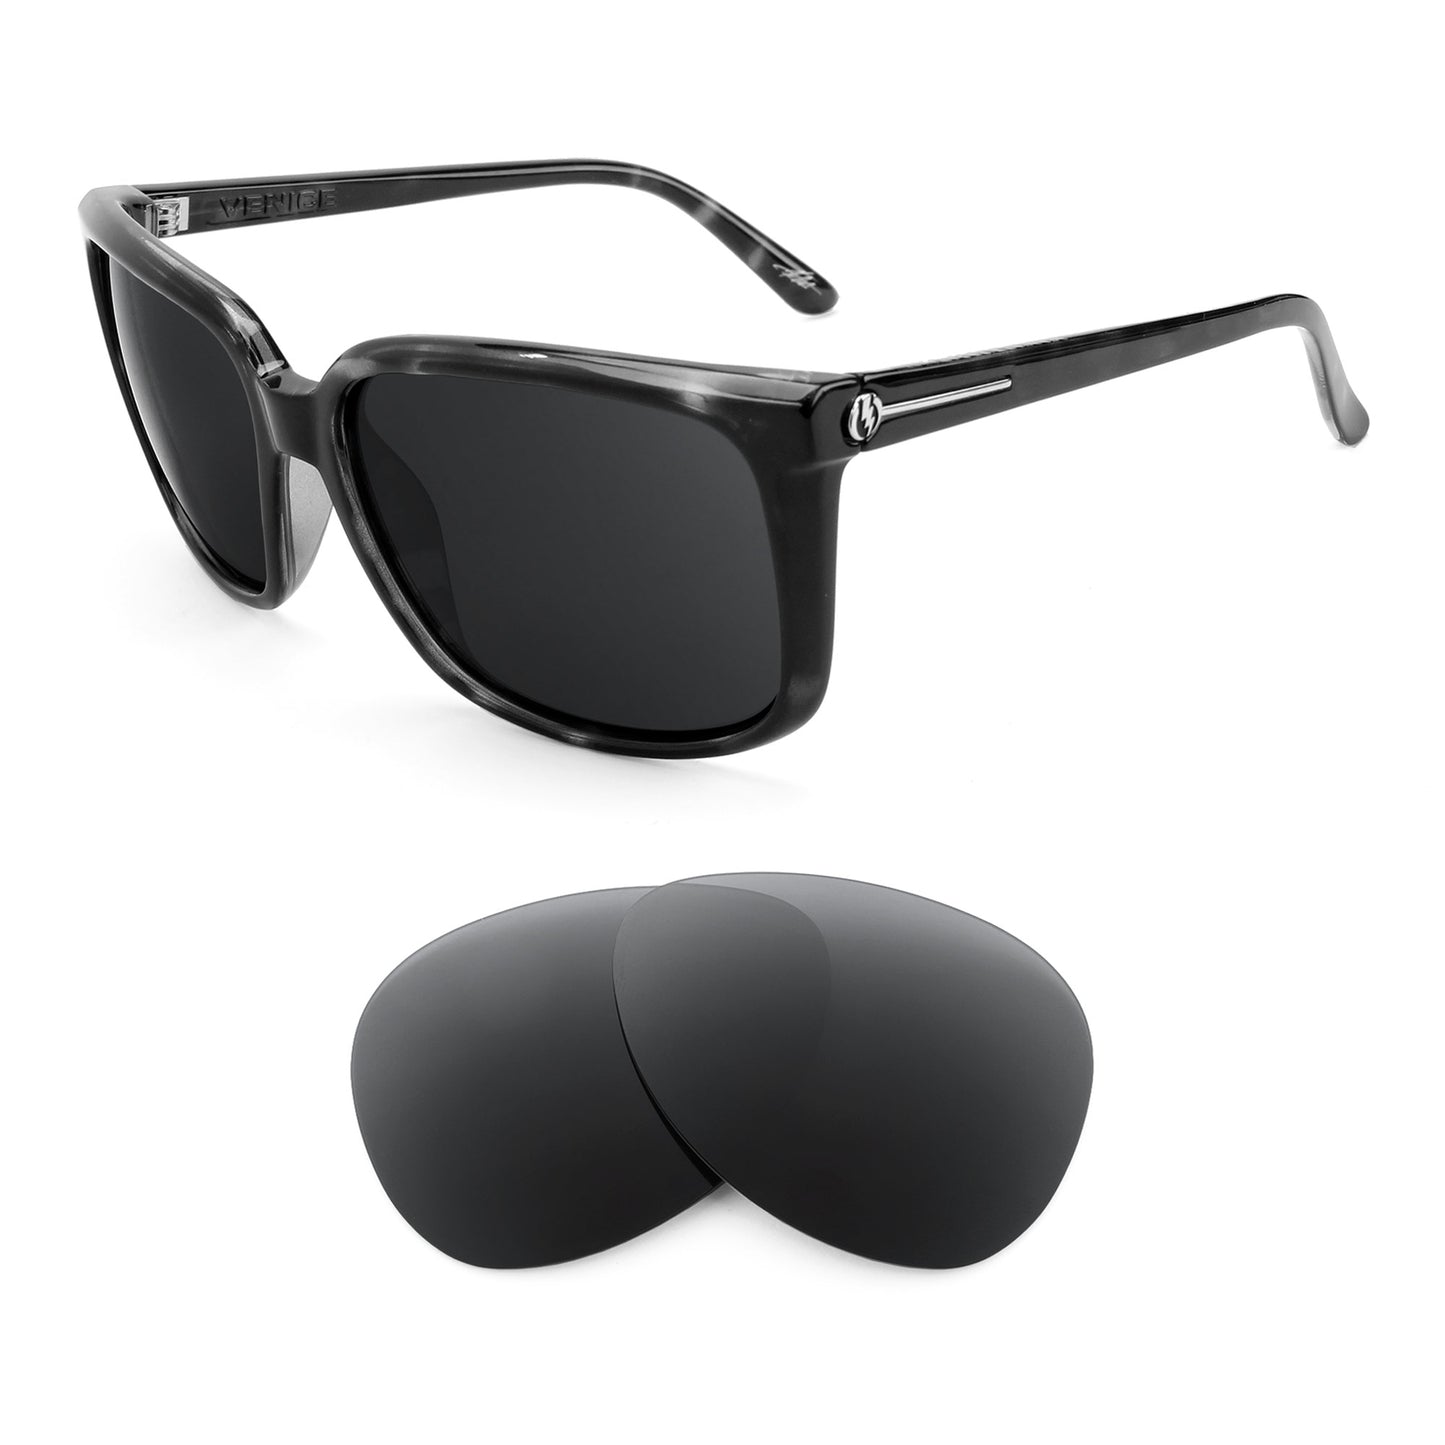 Electric Venice sunglasses with replacement lenses